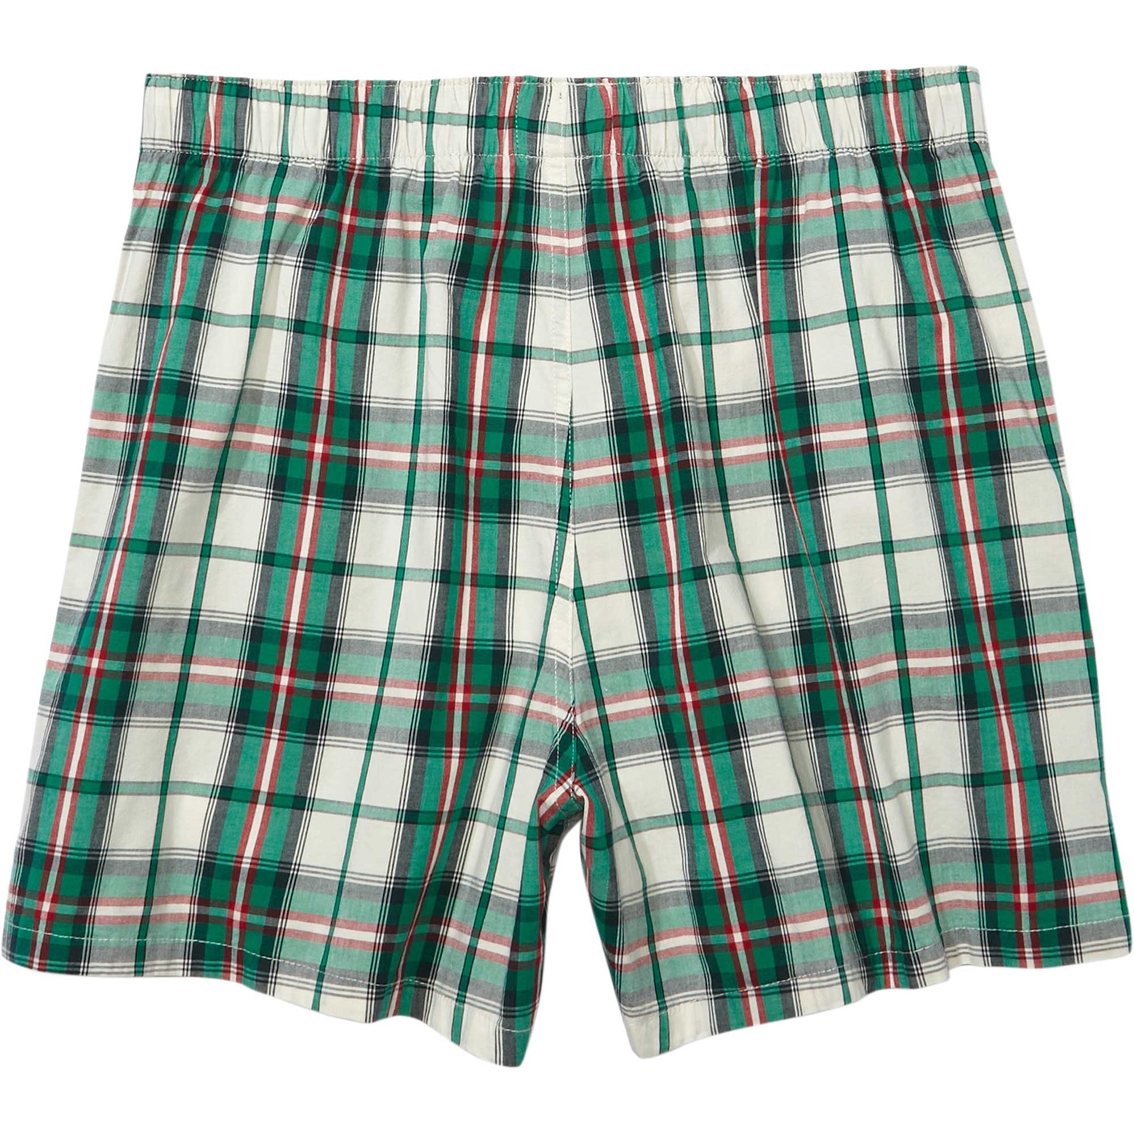 American Eagle AEO Plaid Stretch Boxer Shorts - Image 4 of 4